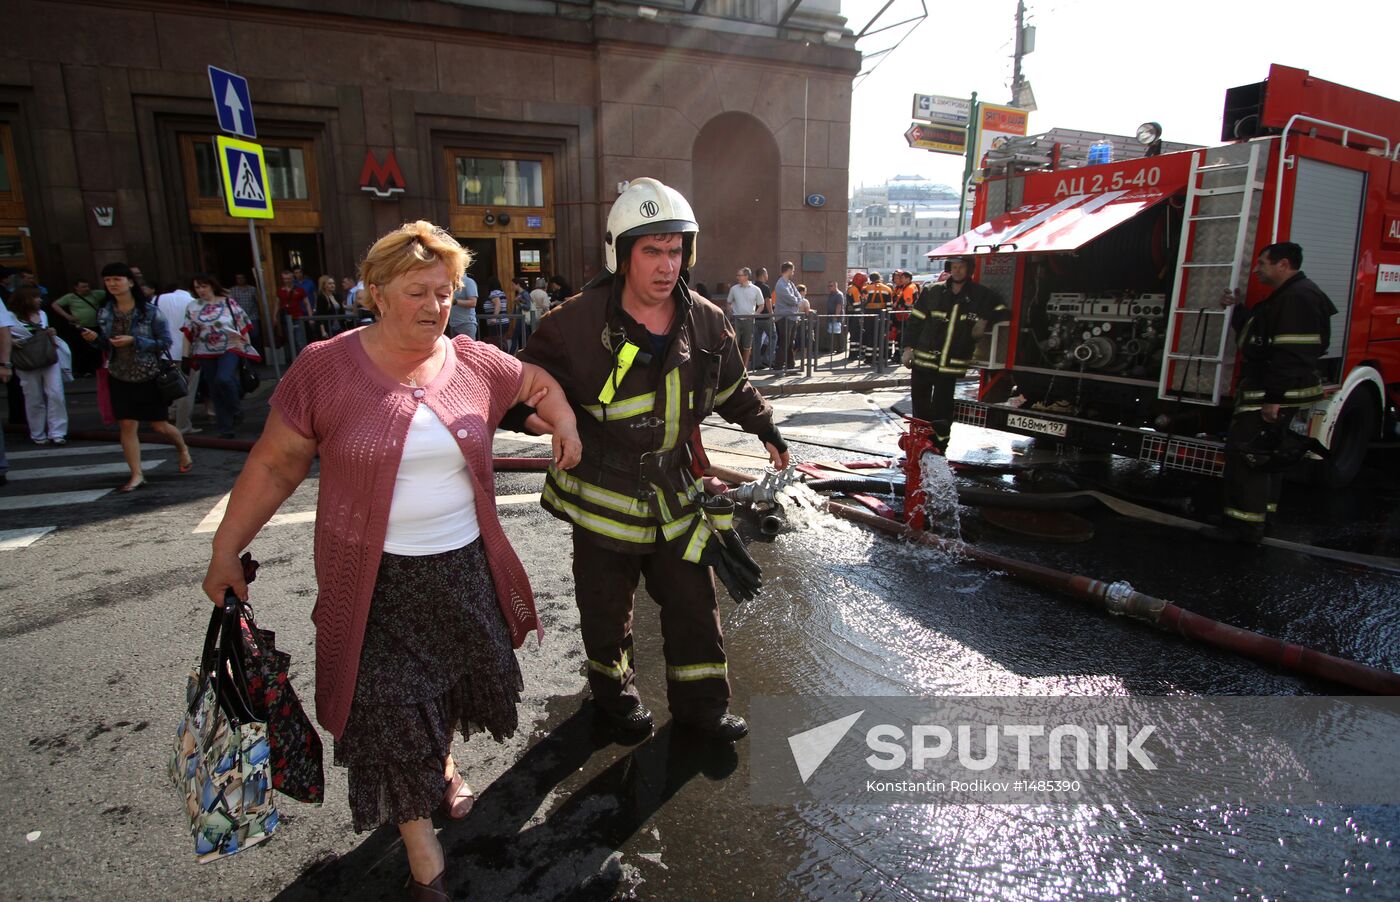 Moscow's Okhotny Ryad subway station closed due to fire